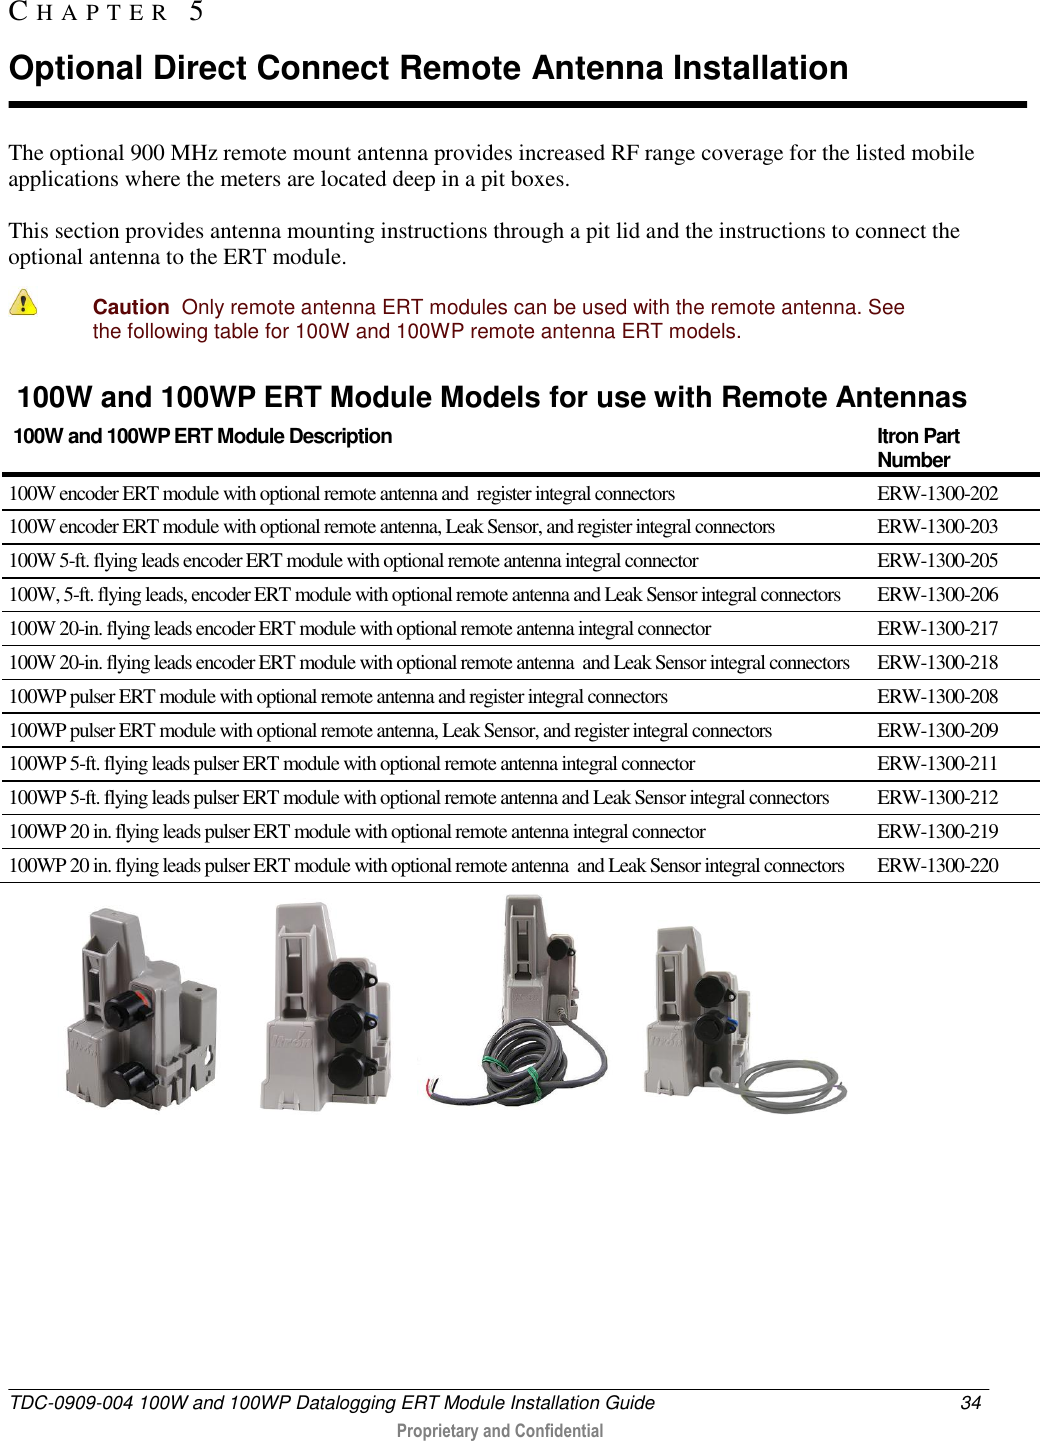  TDC-0909-004 100W and 100WP Datalogging ERT Module Installation Guide  34   Proprietary and Confidential     The optional 900 MHz remote mount antenna provides increased RF range coverage for the listed mobile applications where the meters are located deep in a pit boxes. This section provides antenna mounting instructions through a pit lid and the instructions to connect the optional antenna to the ERT module.  Caution  Only remote antenna ERT modules can be used with the remote antenna. See the following table for 100W and 100WP remote antenna ERT models.  100W and 100WP ERT Module Models for use with Remote Antennas  100W and 100WP ERT Module Description Itron Part Number 100W encoder ERT module with optional remote antenna and  register integral connectors ERW-1300-202 100W encoder ERT module with optional remote antenna, Leak Sensor, and register integral connectors ERW-1300-203 100W 5-ft. flying leads encoder ERT module with optional remote antenna integral connector ERW-1300-205 100W, 5-ft. flying leads, encoder ERT module with optional remote antenna and Leak Sensor integral connectors ERW-1300-206 100W 20-in. flying leads encoder ERT module with optional remote antenna integral connector ERW-1300-217 100W 20-in. flying leads encoder ERT module with optional remote antenna  and Leak Sensor integral connectors ERW-1300-218 100WP pulser ERT module with optional remote antenna and register integral connectors ERW-1300-208 100WP pulser ERT module with optional remote antenna, Leak Sensor, and register integral connectors ERW-1300-209 100WP 5-ft. flying leads pulser ERT module with optional remote antenna integral connector ERW-1300-211 100WP 5-ft. flying leads pulser ERT module with optional remote antenna and Leak Sensor integral connectors  ERW-1300-212 100WP 20 in. flying leads pulser ERT module with optional remote antenna integral connector ERW-1300-219 100WP 20 in. flying leads pulser ERT module with optional remote antenna  and Leak Sensor integral connectors ERW-1300-220                 CH A P T E R   5  Optional Direct Connect Remote Antenna Installation 